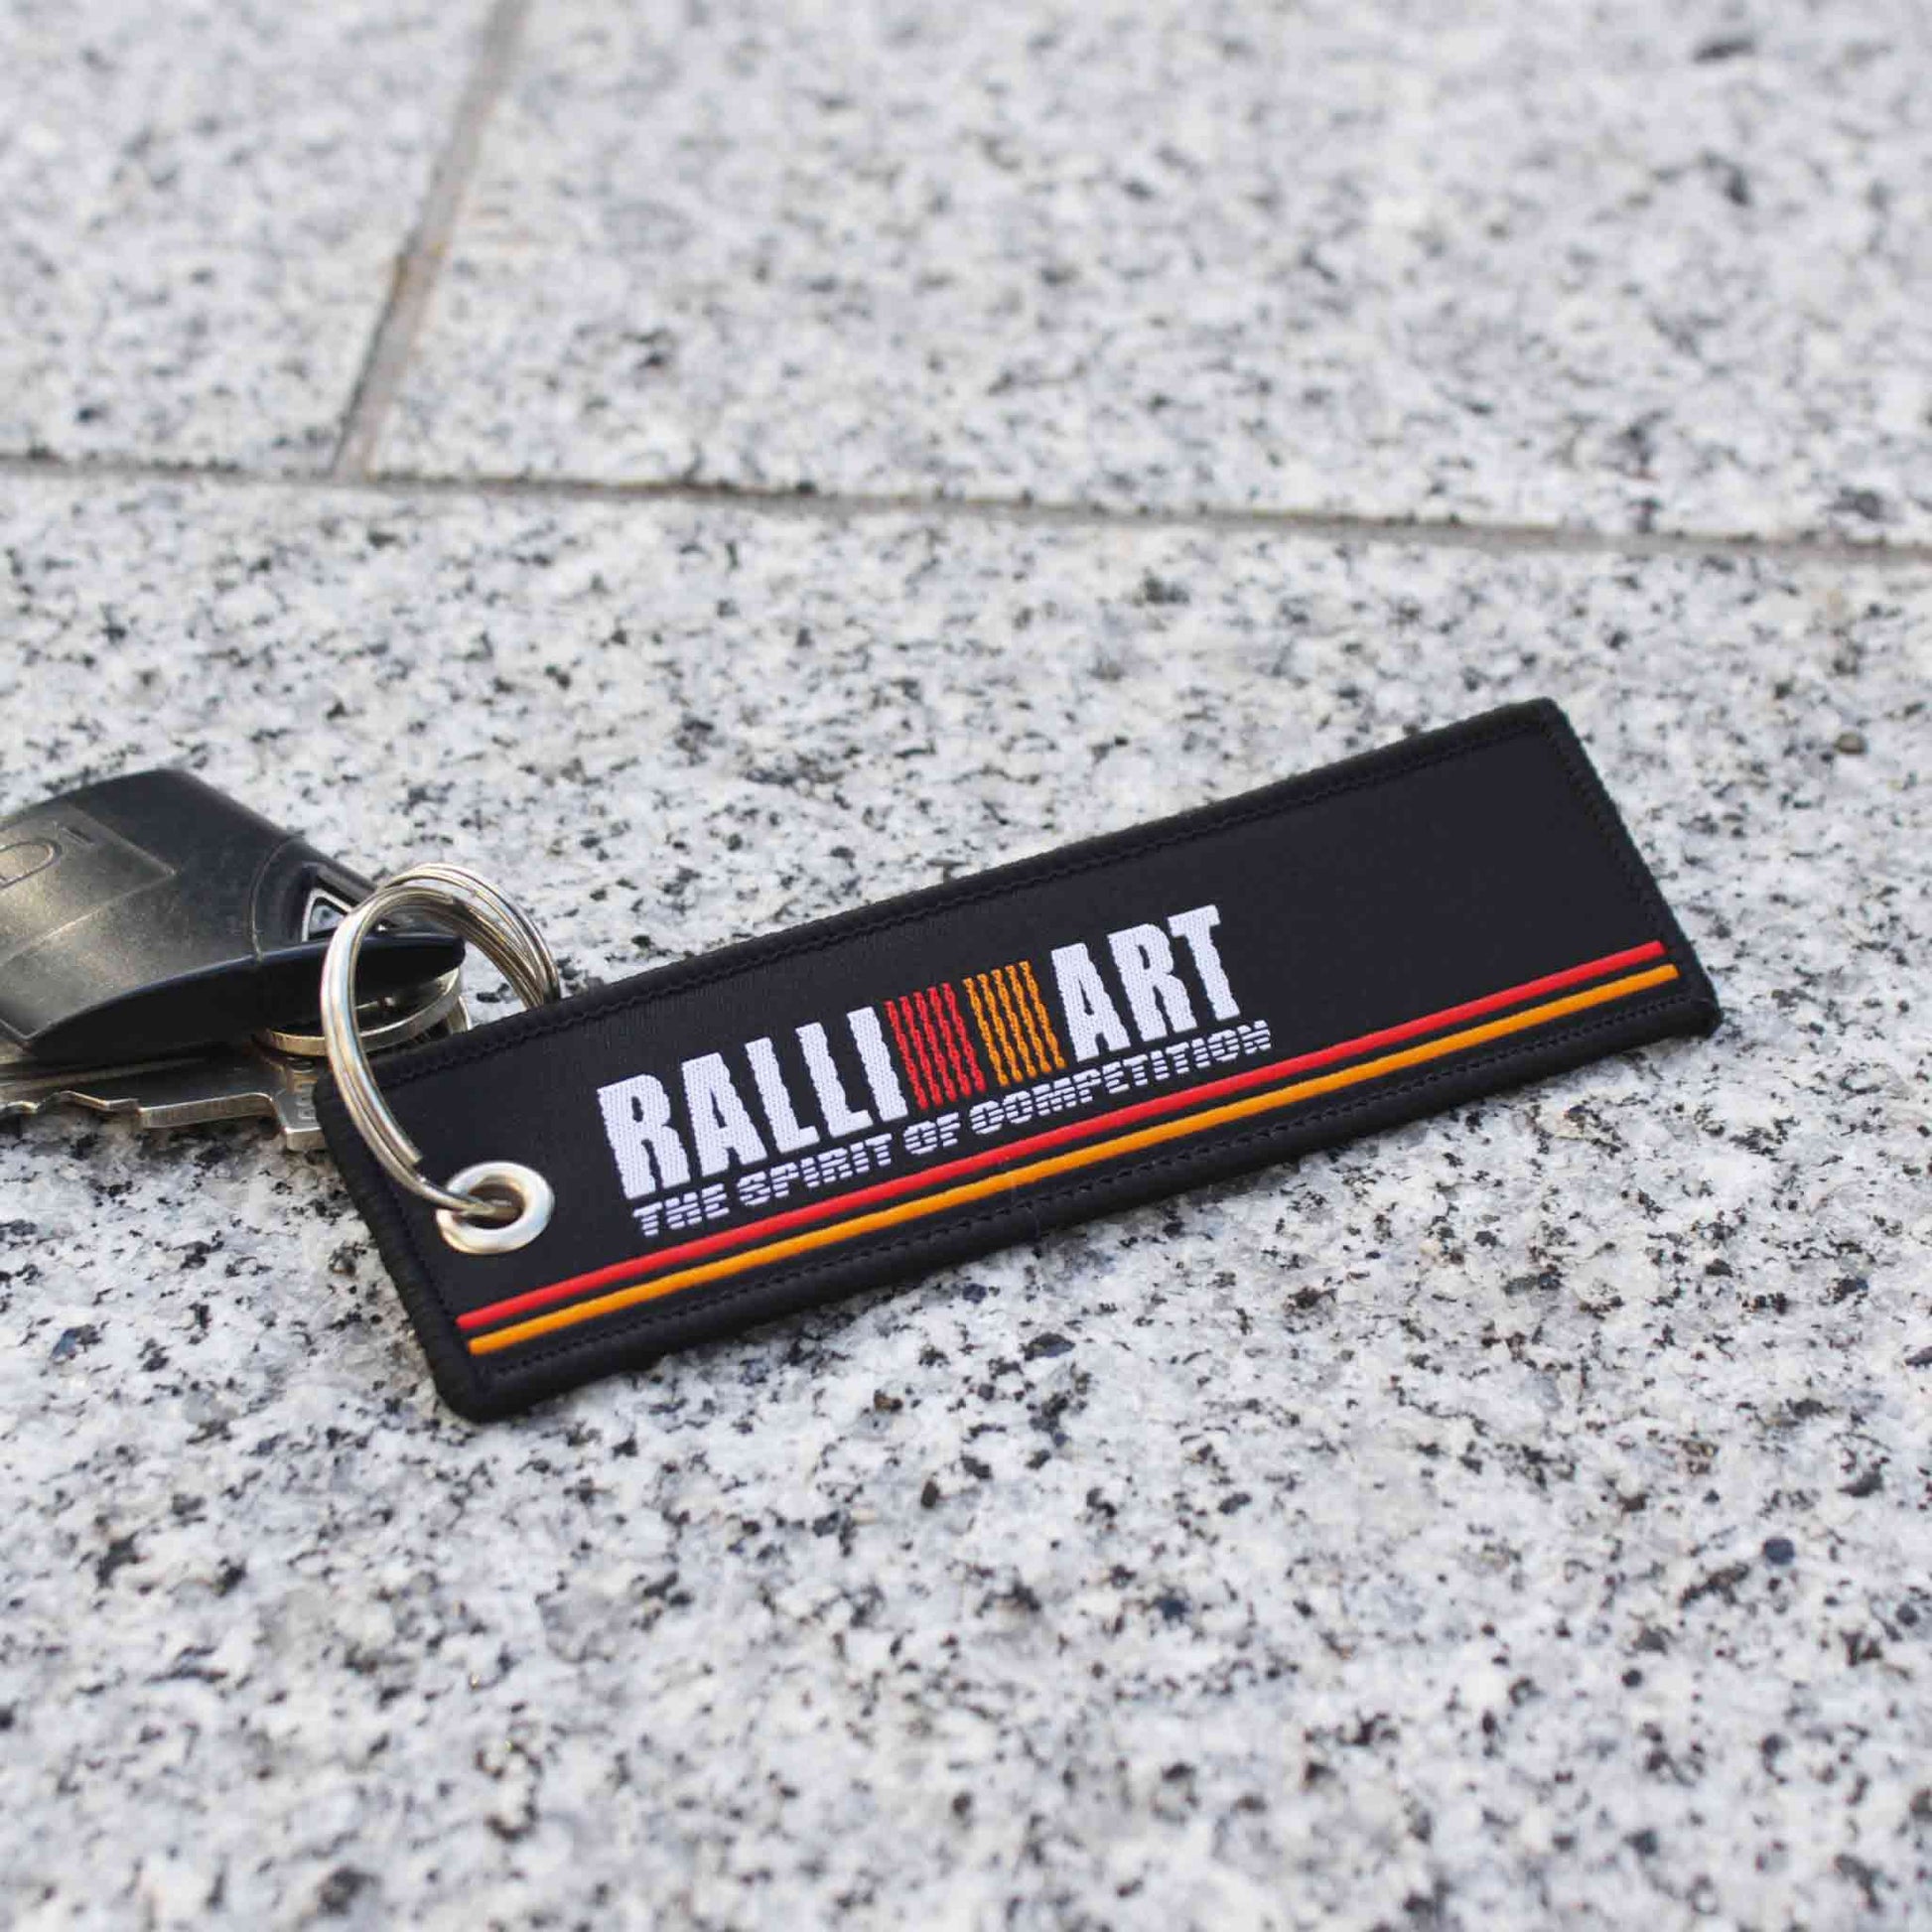 A ralli-art lanyard holding a fob placed on a marble floor